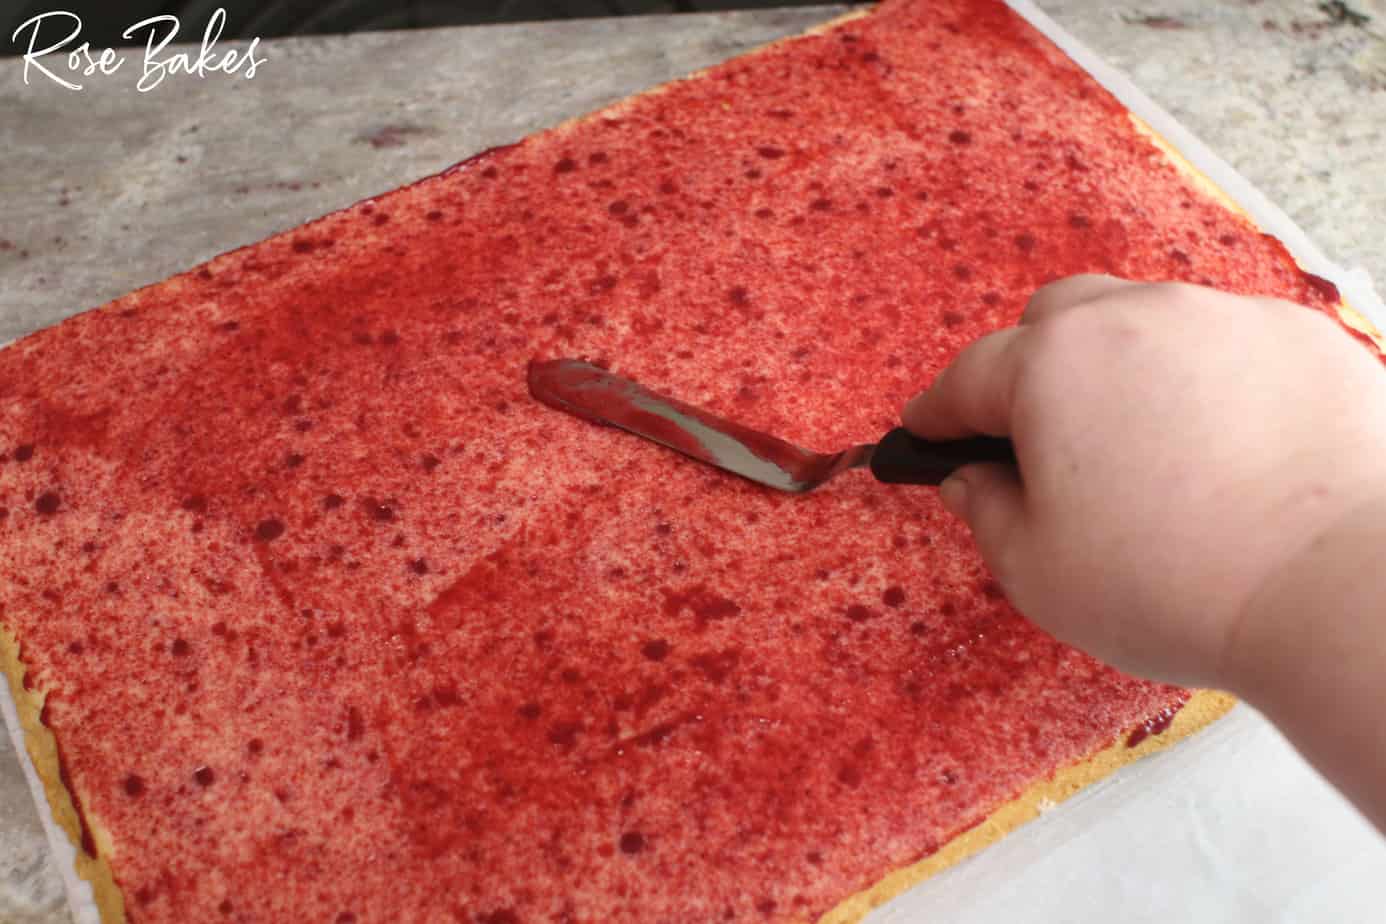 raspberry filling covering the cake layer